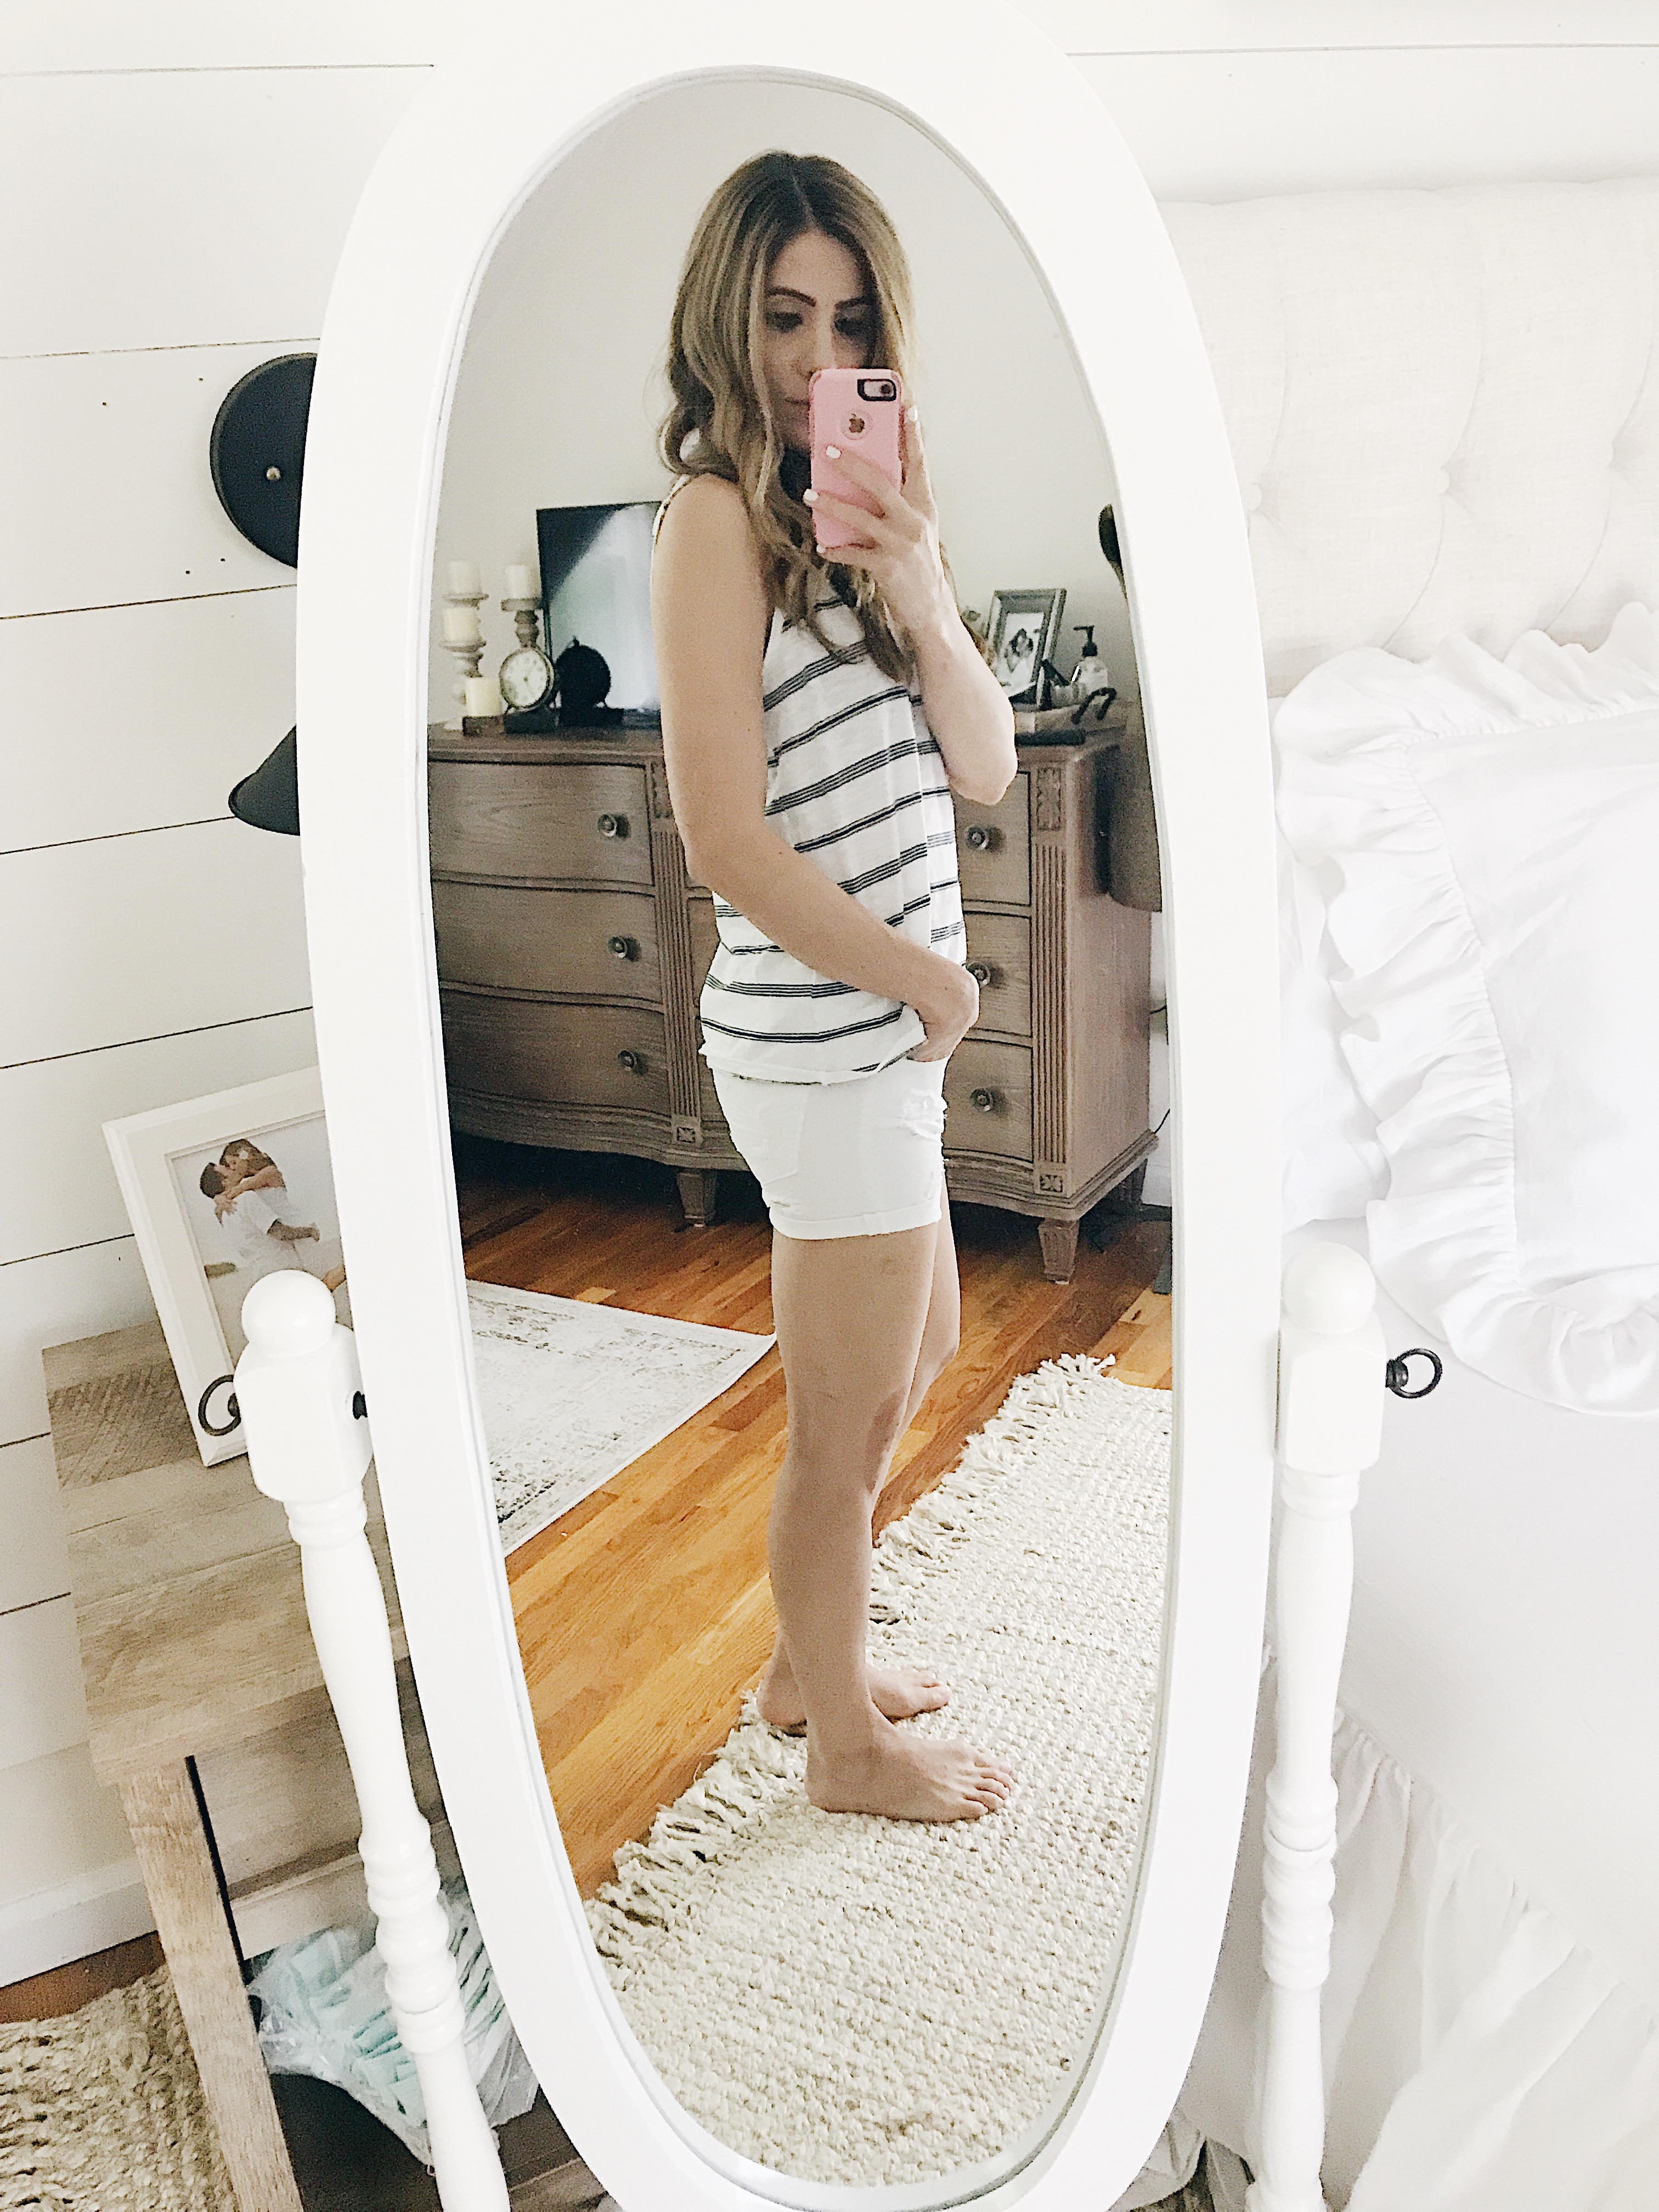 A full review of the Best Mom Shorts, including information on rise, inseam, and photos to show fit! Including a review of American Eagle's White Midi Shorts.